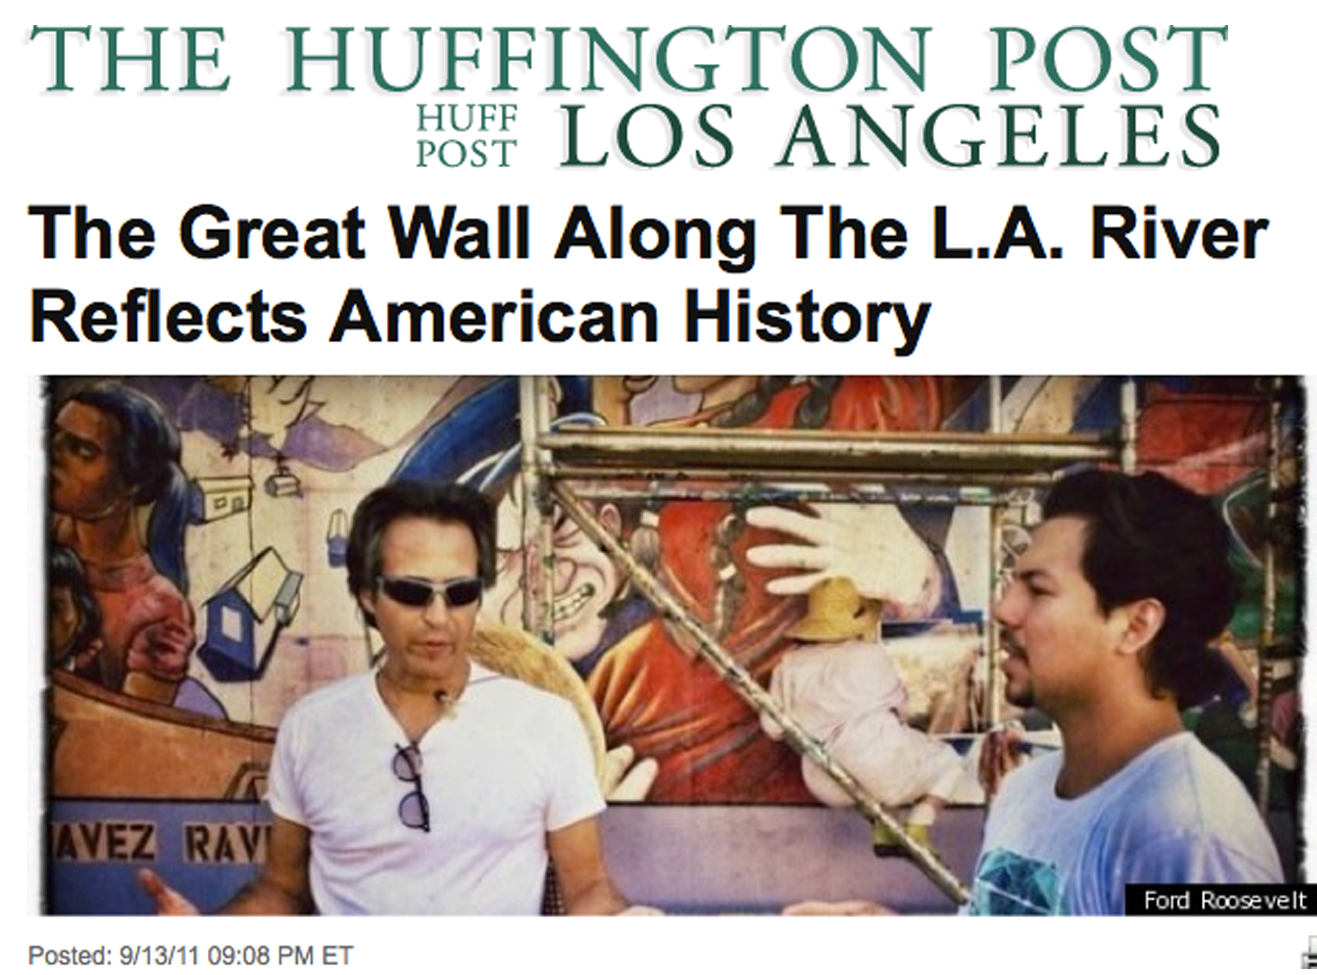 http://www.huffingtonpost.com/2011/09/13/the-great-wall-along-the-_n_961266.html